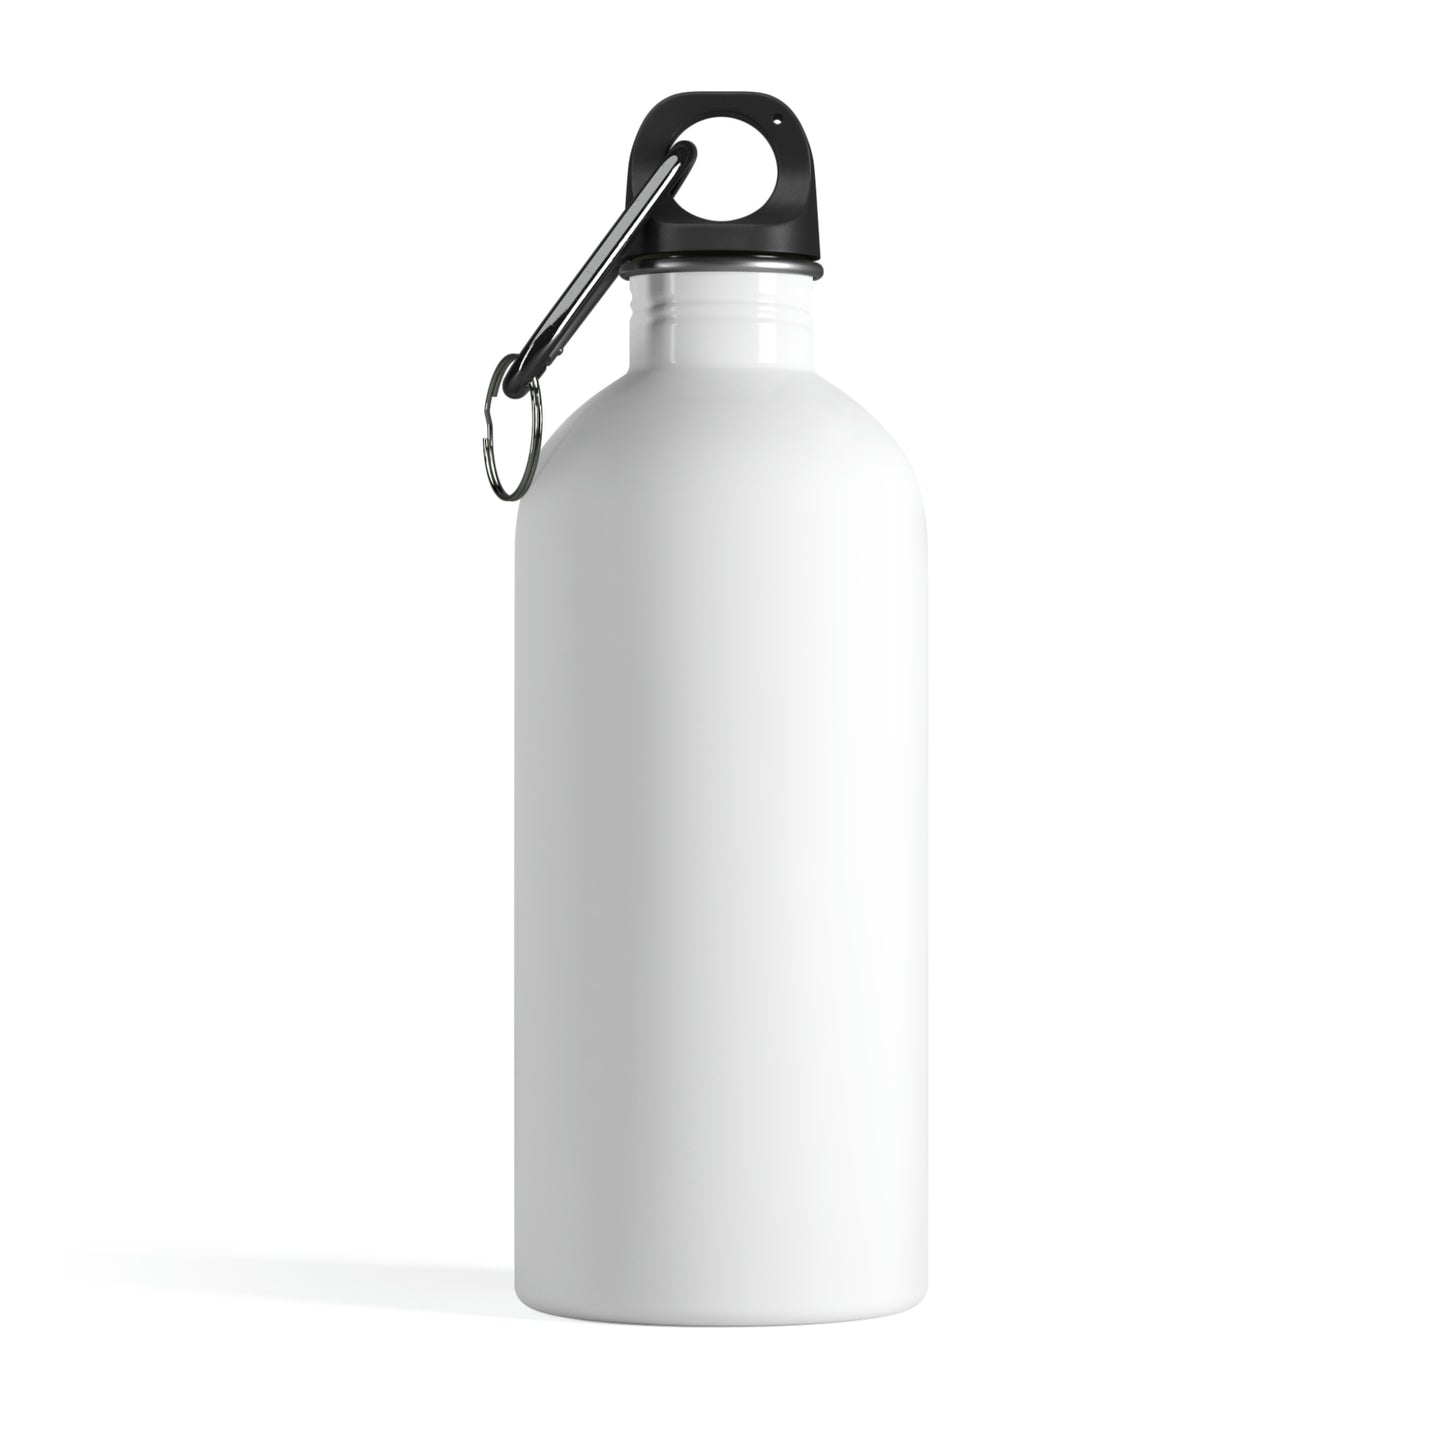 The ONE! - Stainless Steel Water Bottle